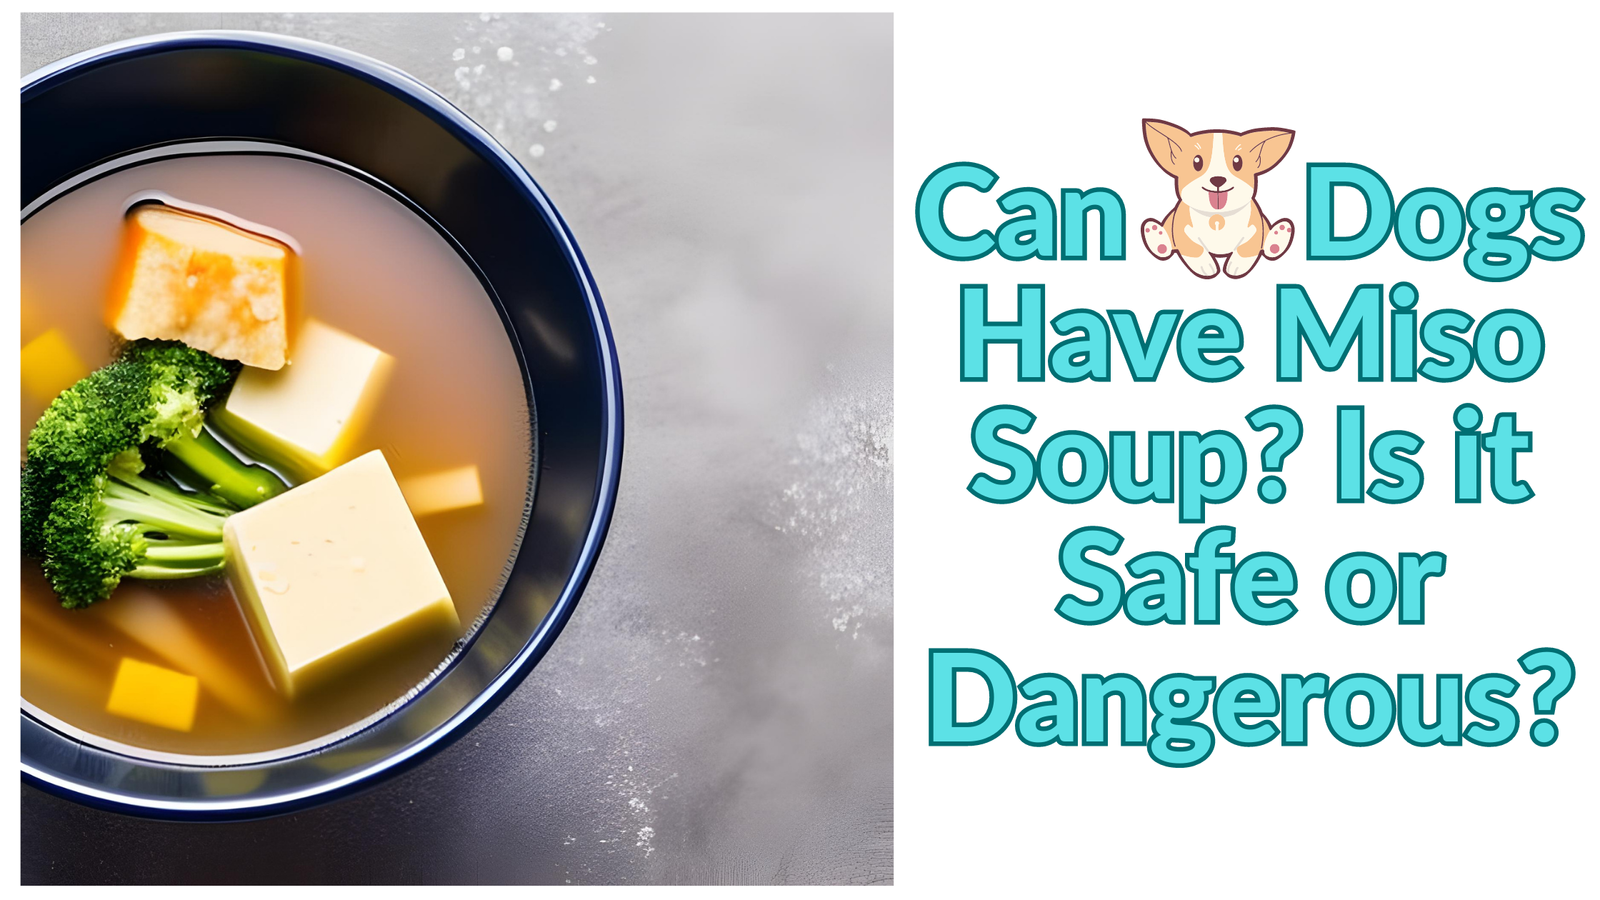 Can Dogs Have Miso Soup? Is it Safe or Dangerous?